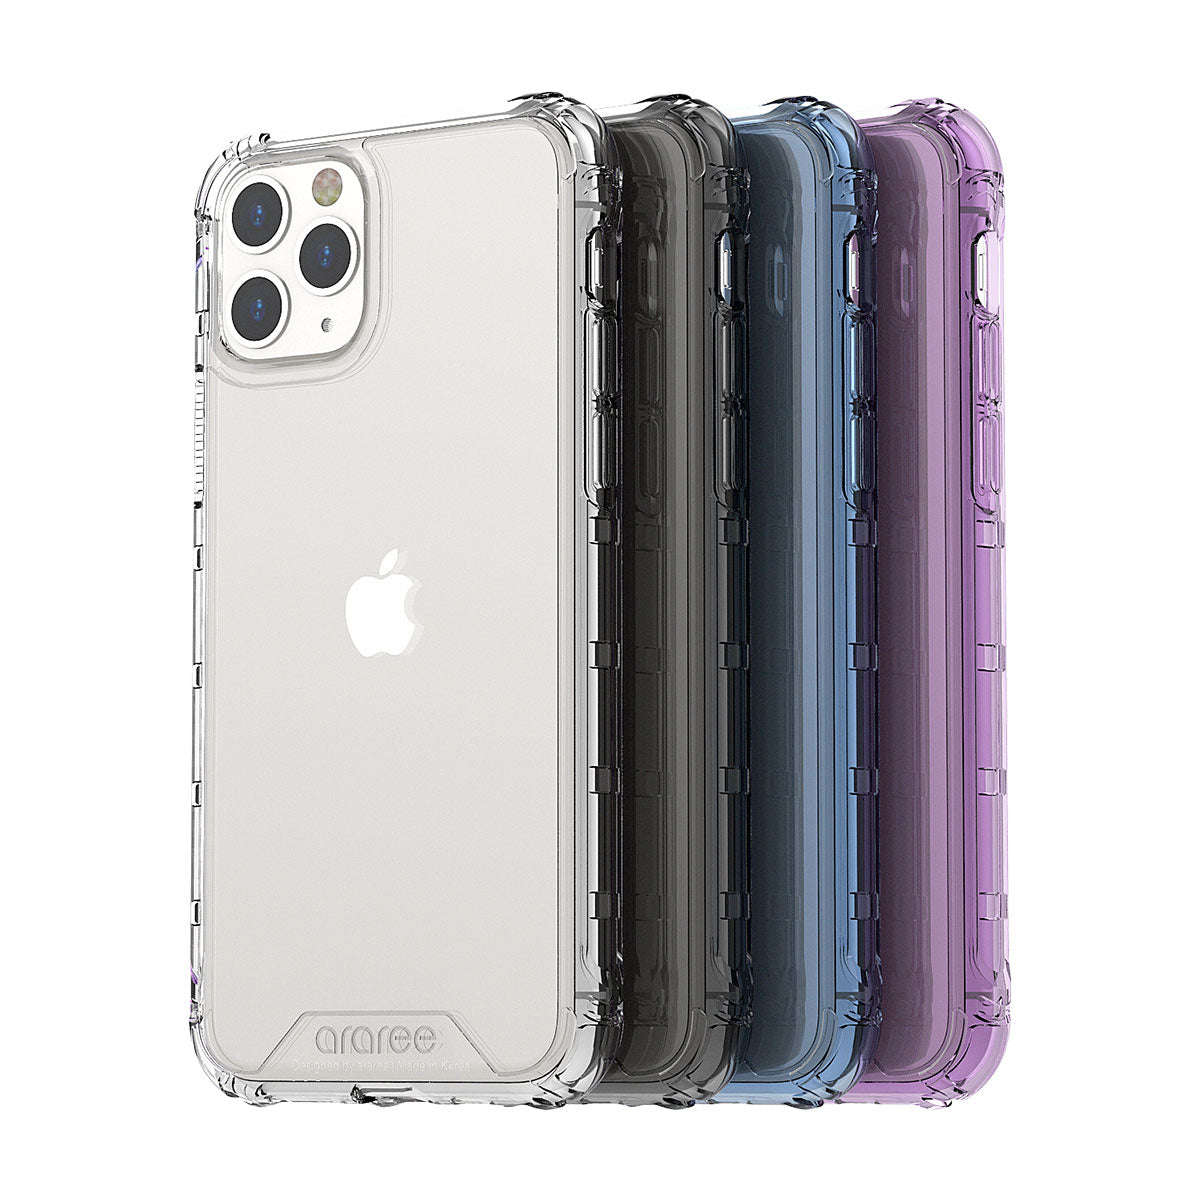 Araree MACH iPhone 11 Pro Max Shockproof Case Cover